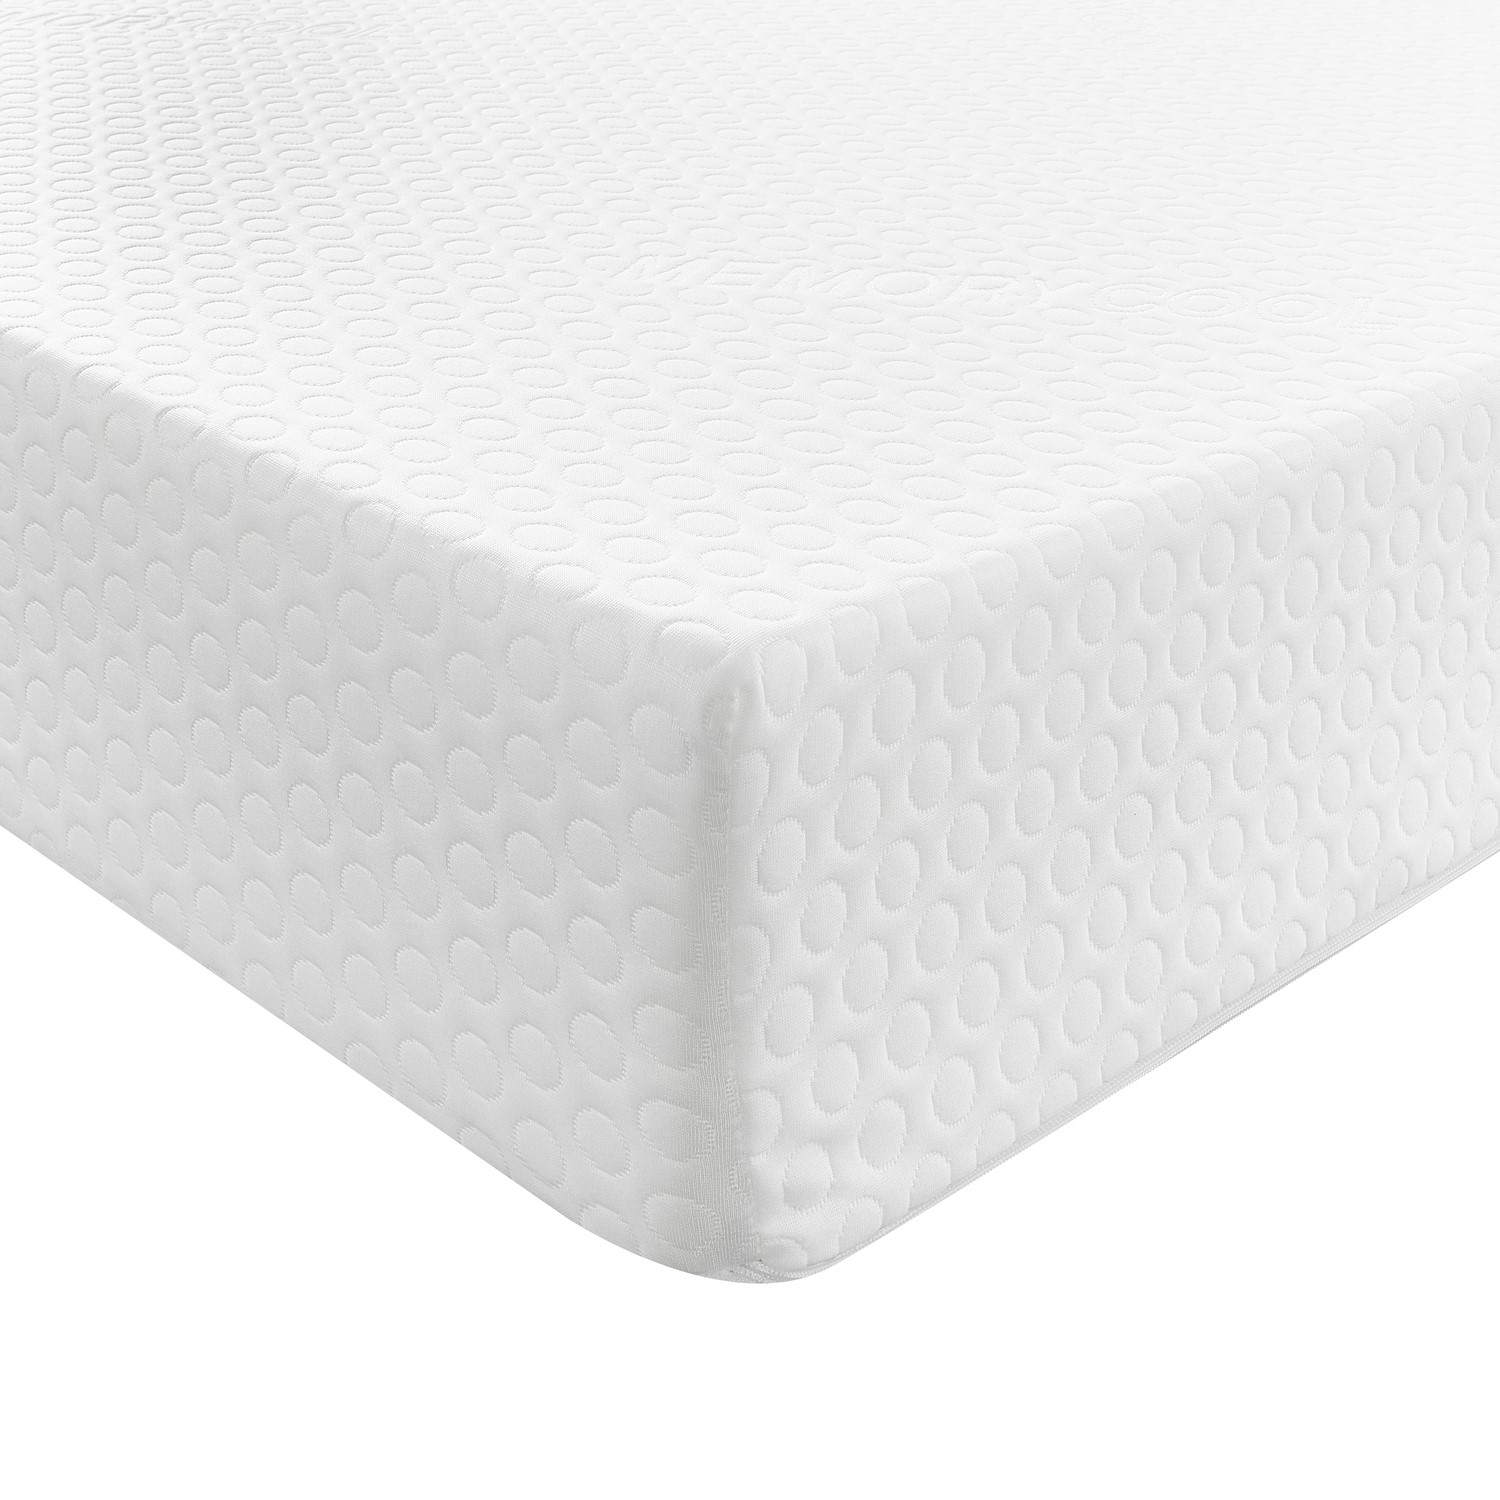 Aspire hypoallergenic memory foam mattress with removable cover - small single